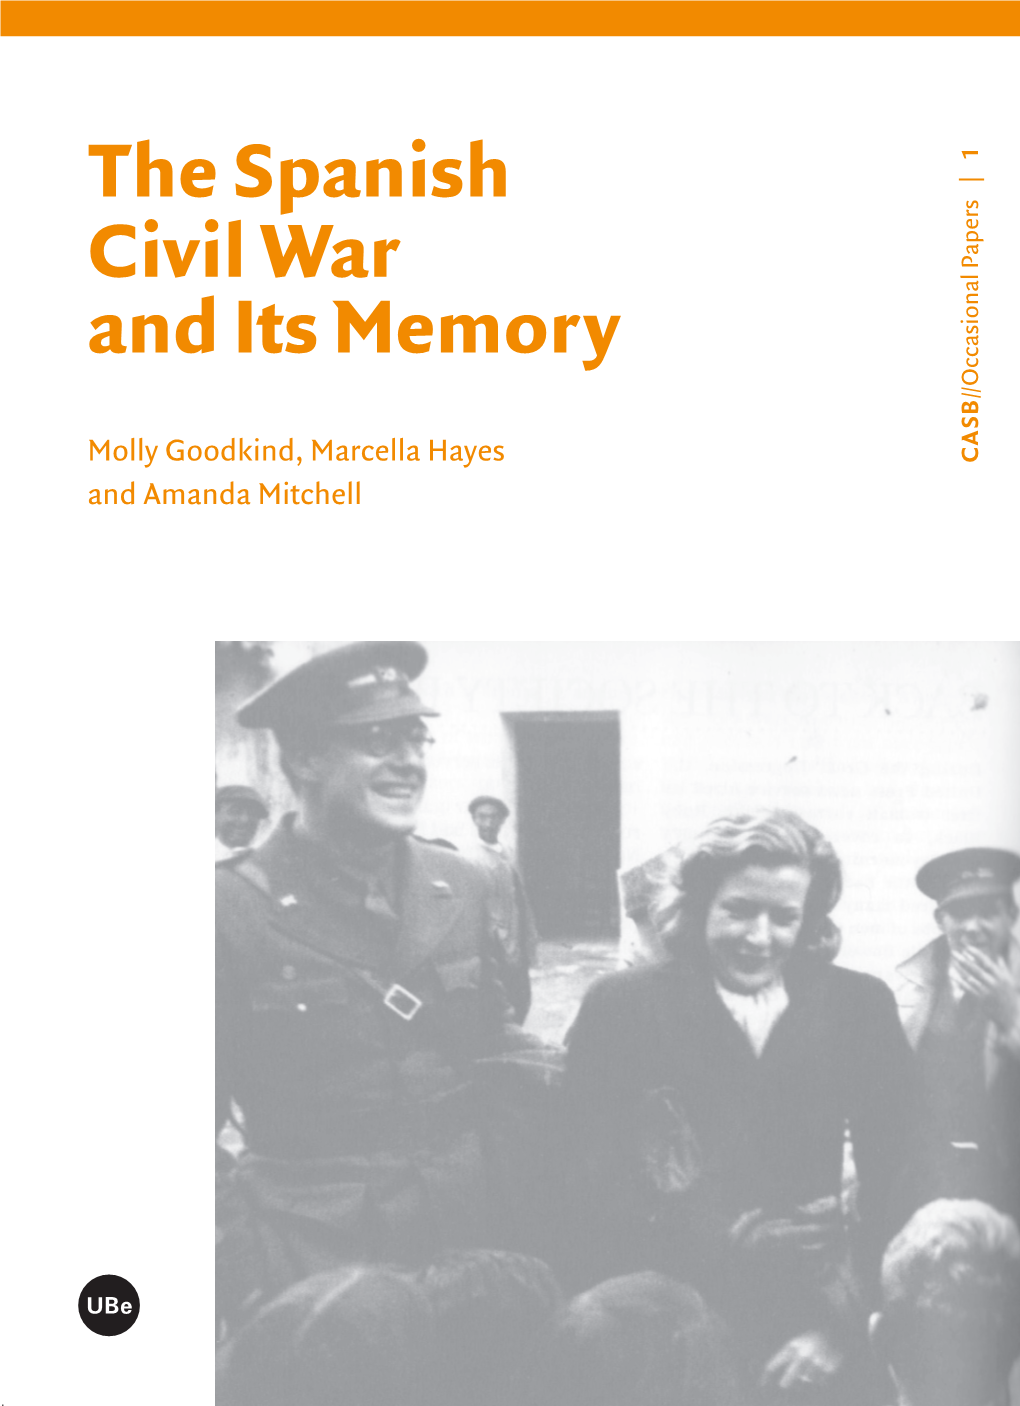 The Spanish Civil War and Its Memory the Spanish Civil War and Its Memory /Occasional Papers | 1 / Molly Goodkind, Marcella Hayes SB